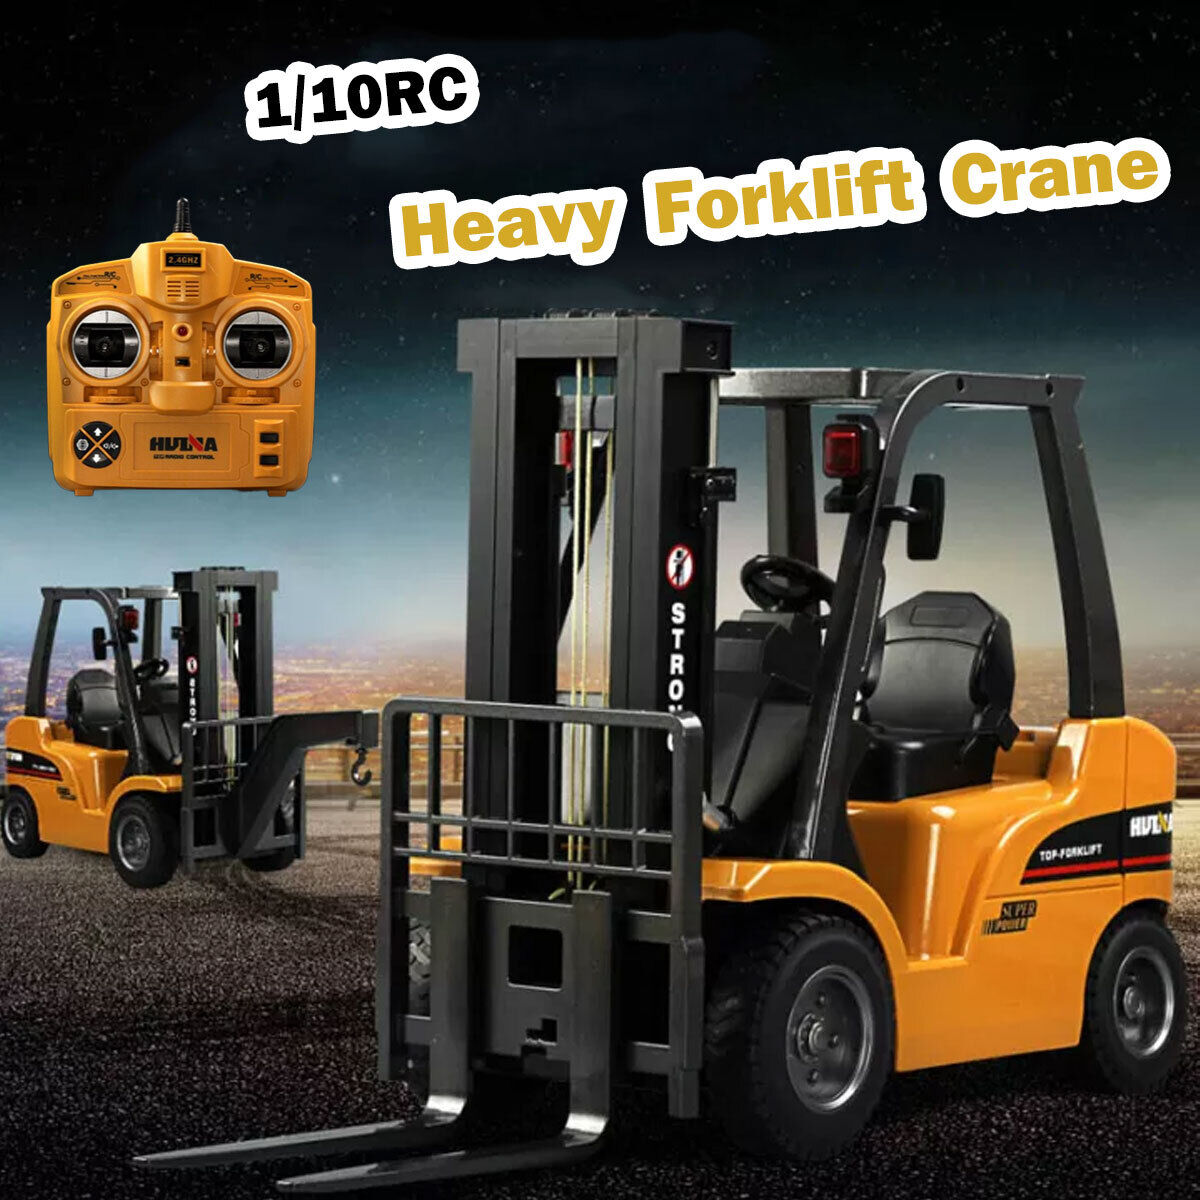 Huina 1/10 RC ForkLift Excavator Industrial Construction Vehicle Truck Toy Kids